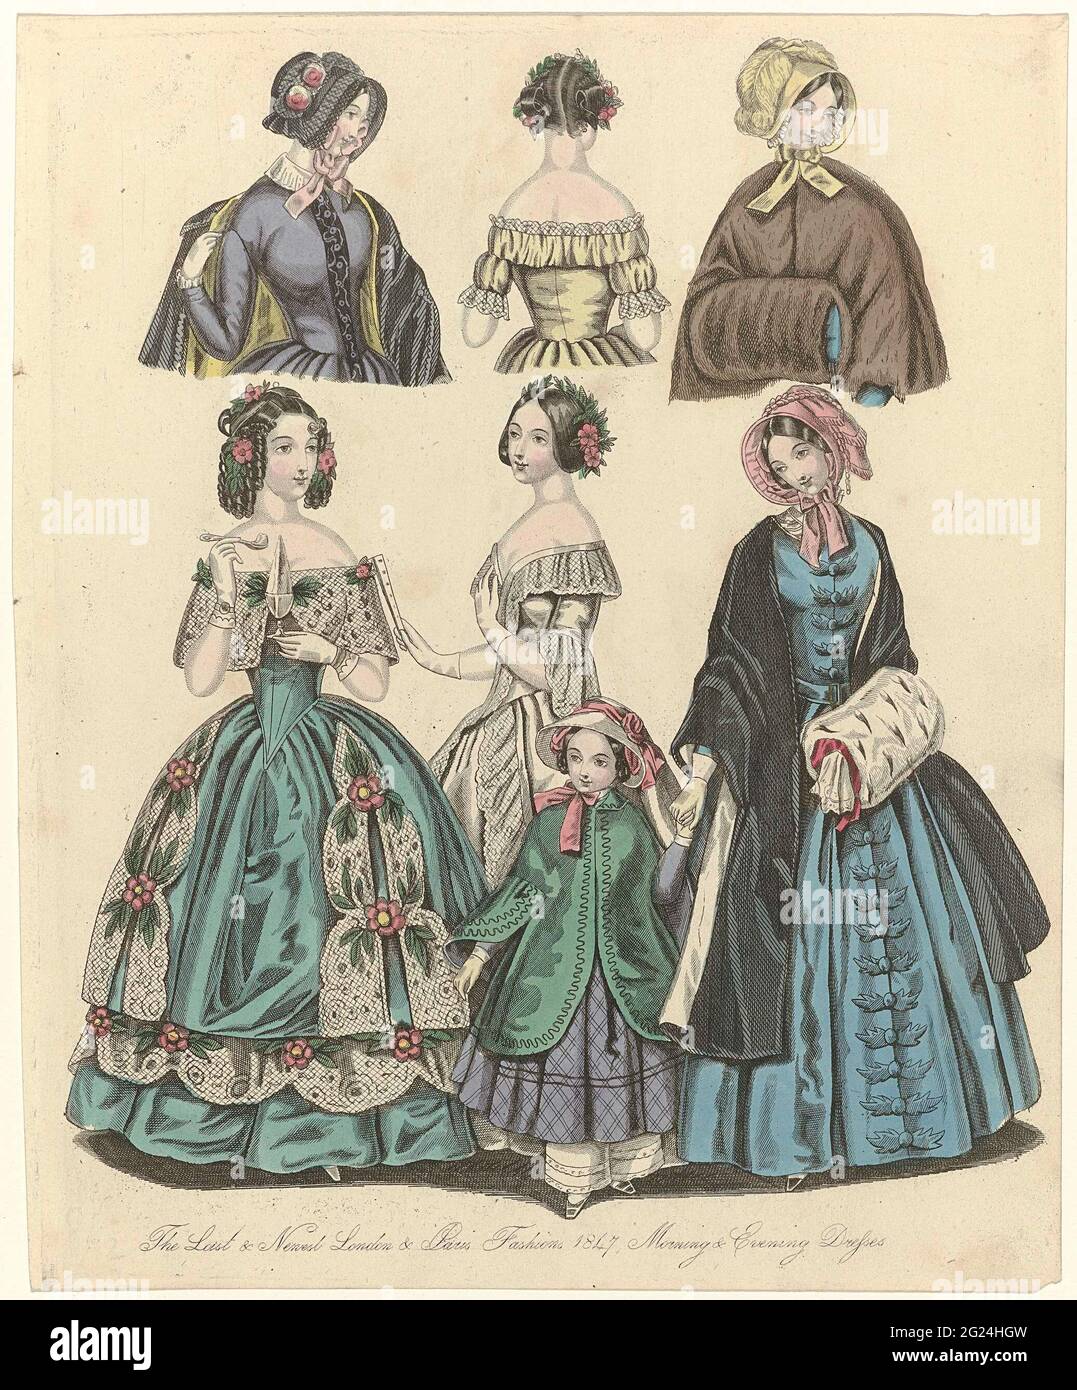 The World of Fashion, 1847: The Last & Newest (...) Morning & Evening  Dresses. The last and newest modes of 1847 from London and Paris. Six women  in morning and evening skies.